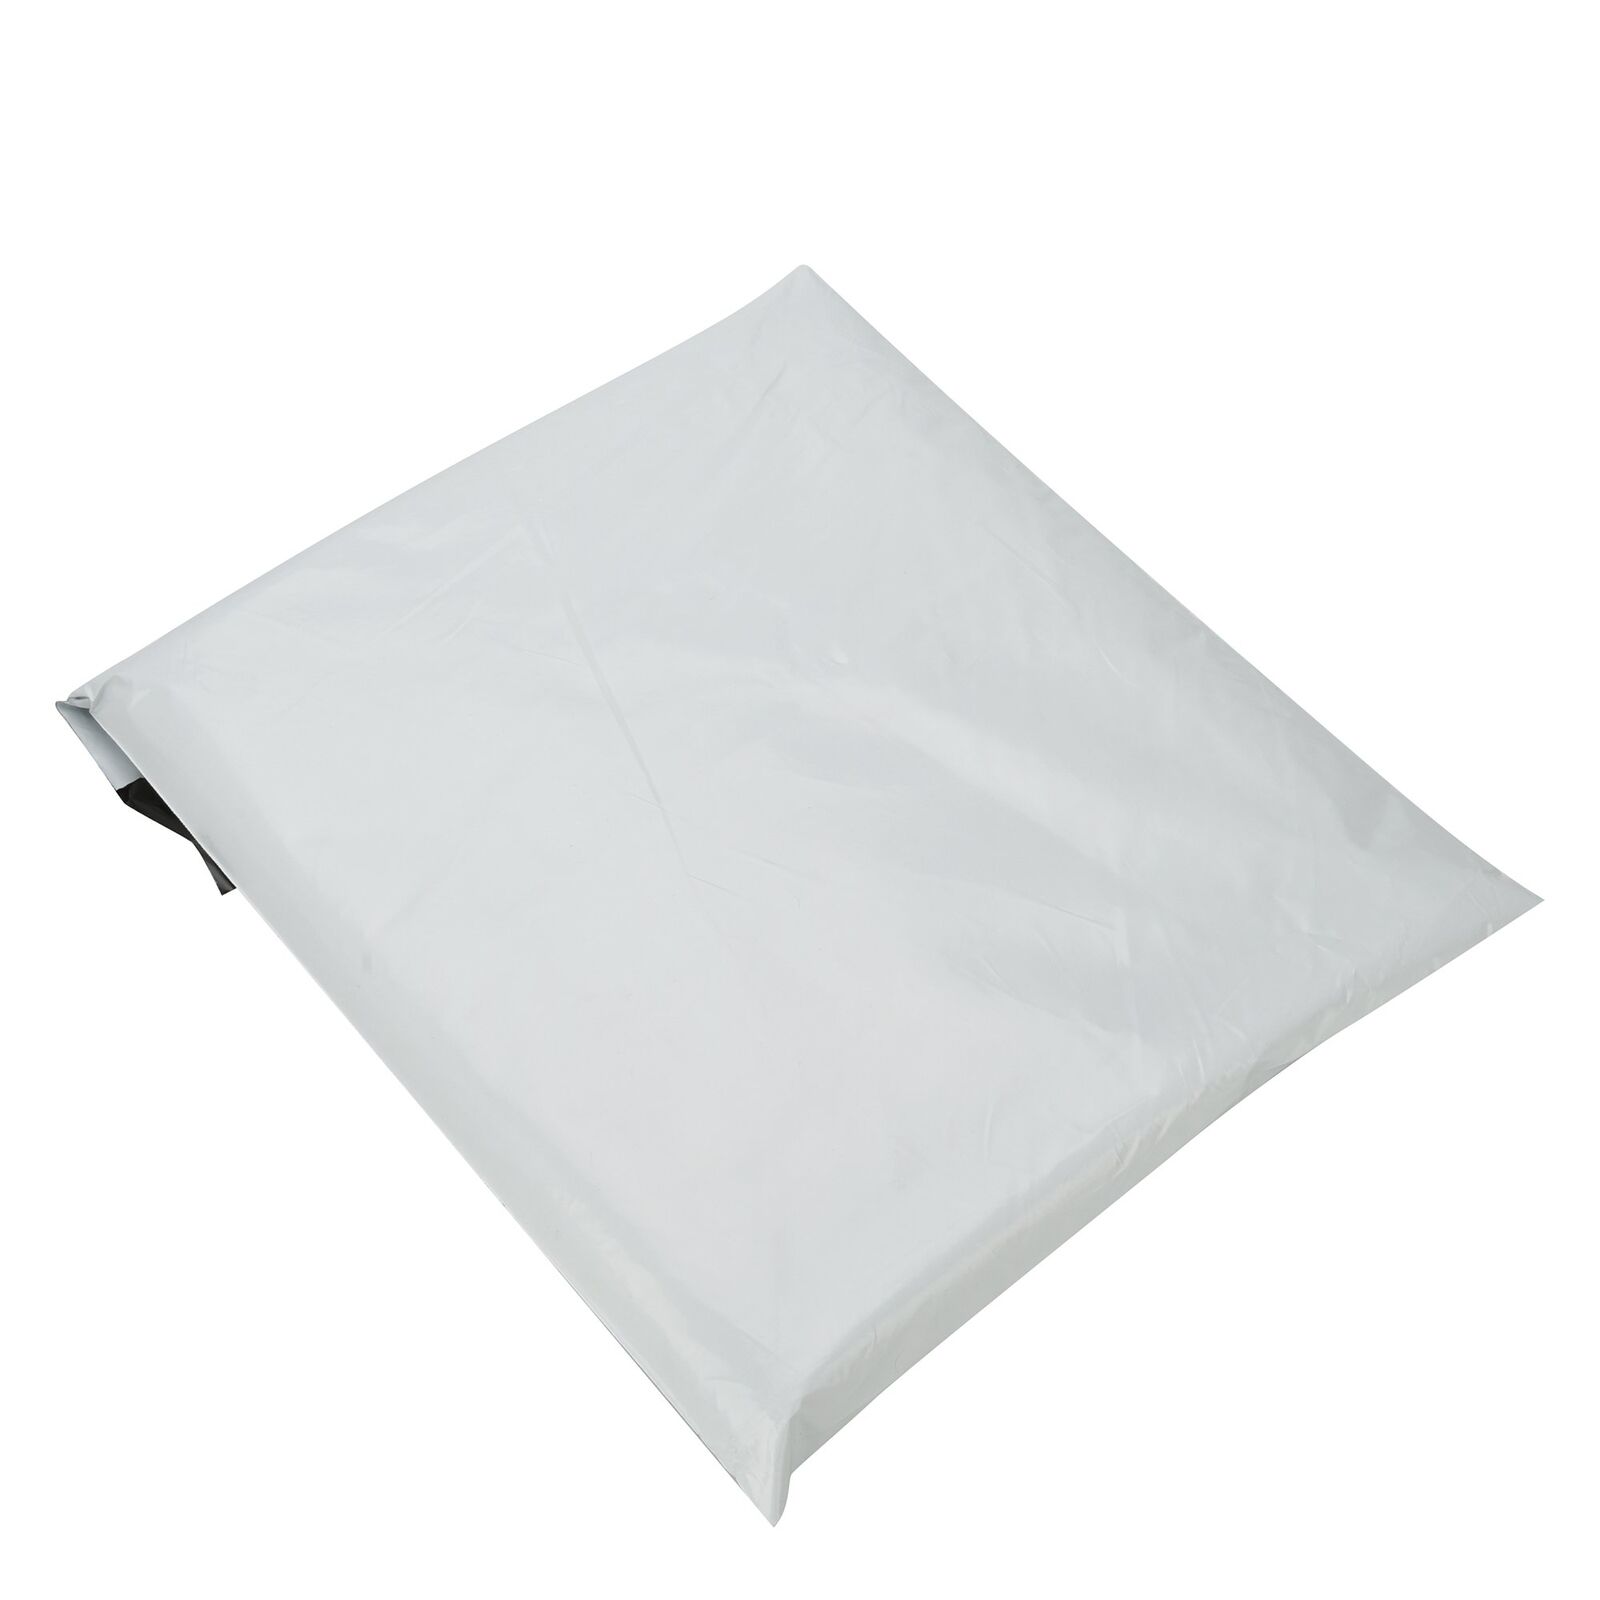 100 10"x13" Poly Mailers Shipping Envelopes Self Sealing Plastic Mailing Bags Unbranded Does not apply - фотография #2